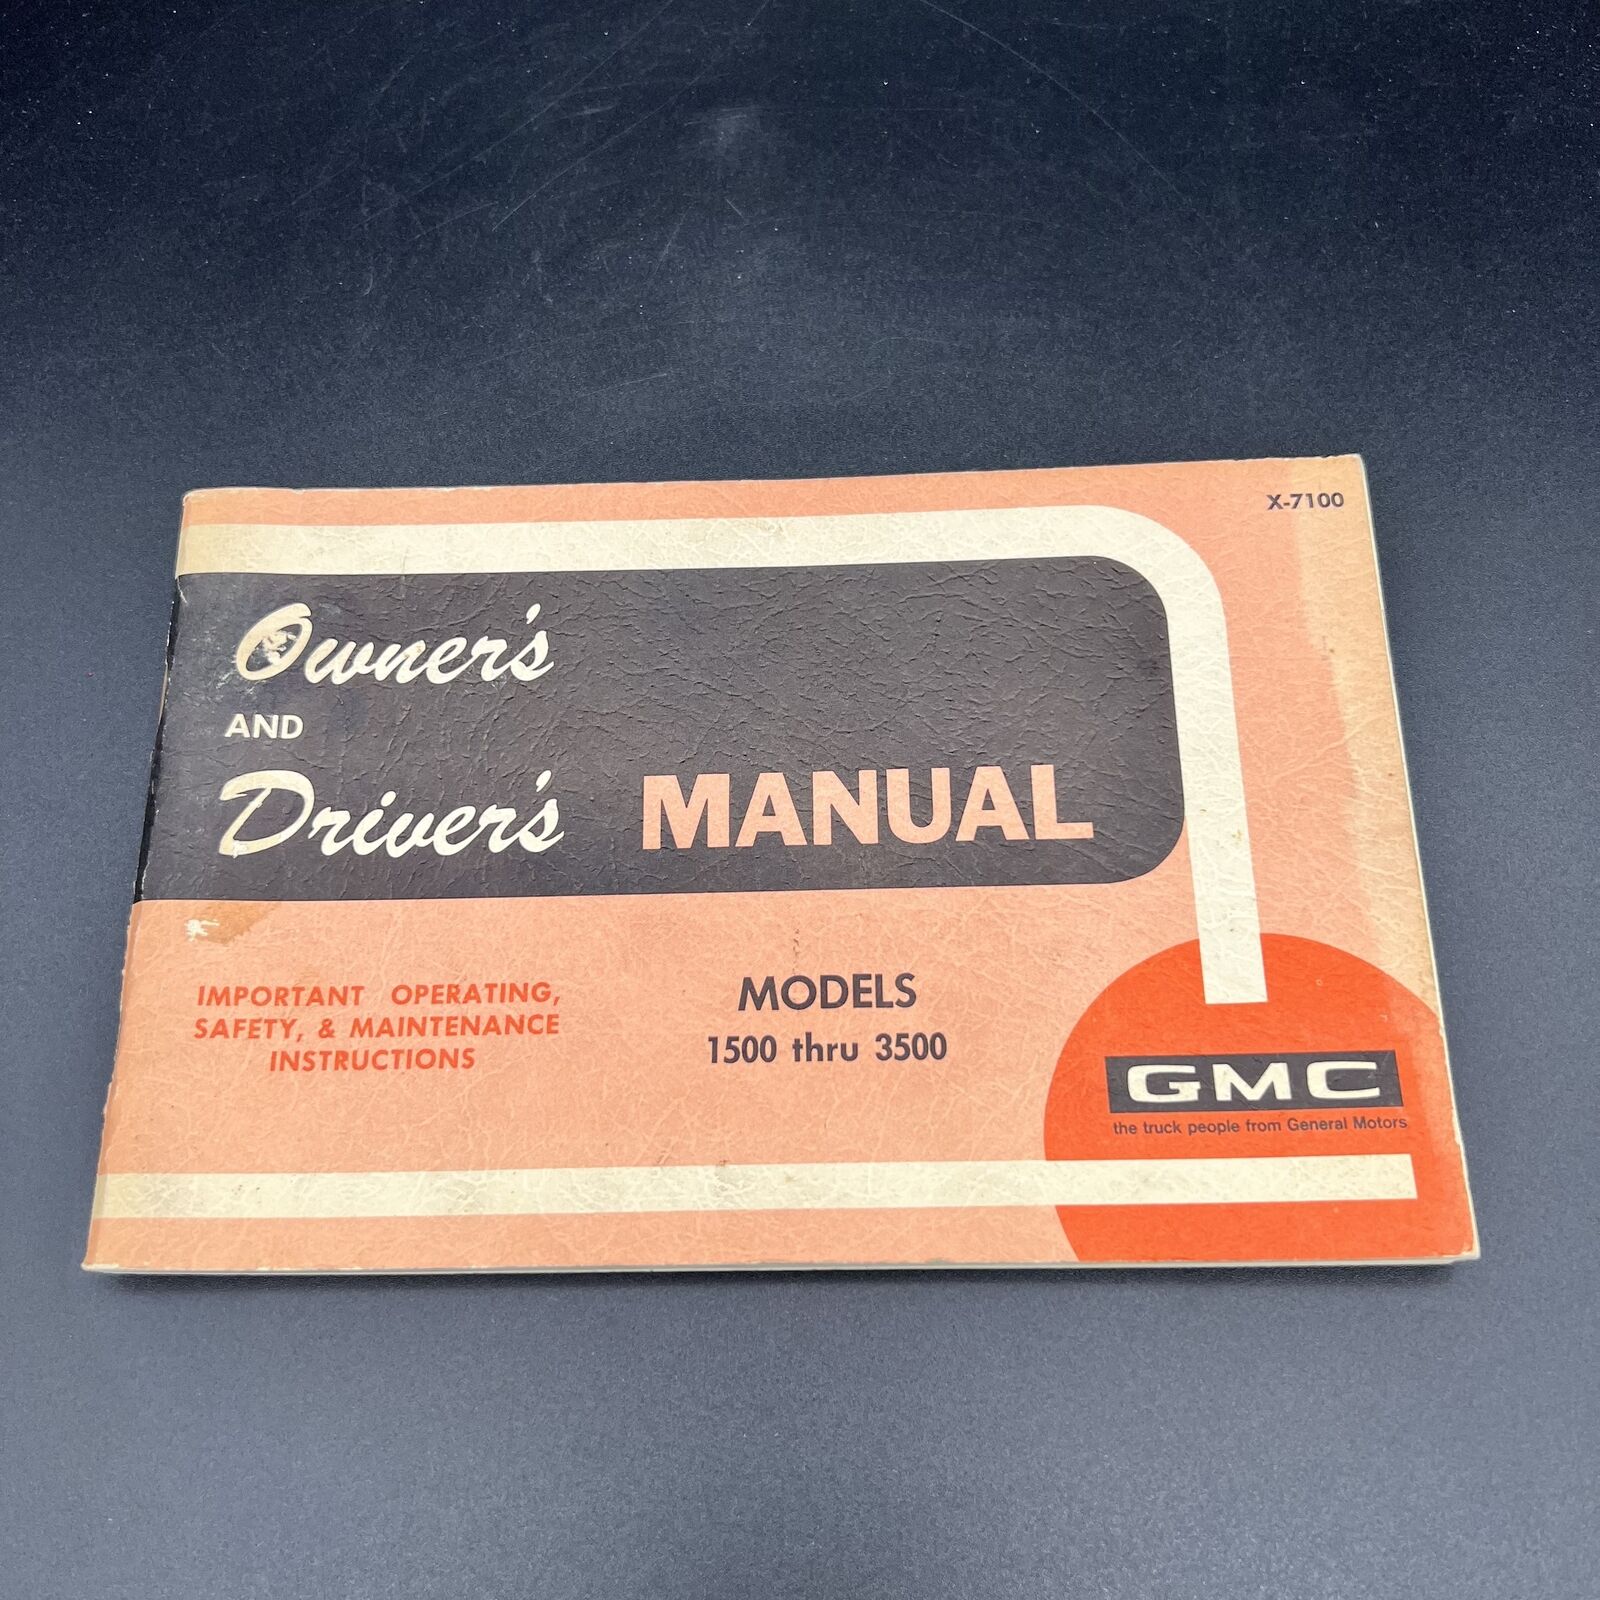 Gmc Owners And Drivers Manual - Models 1500 Thru 3500 - ©1970